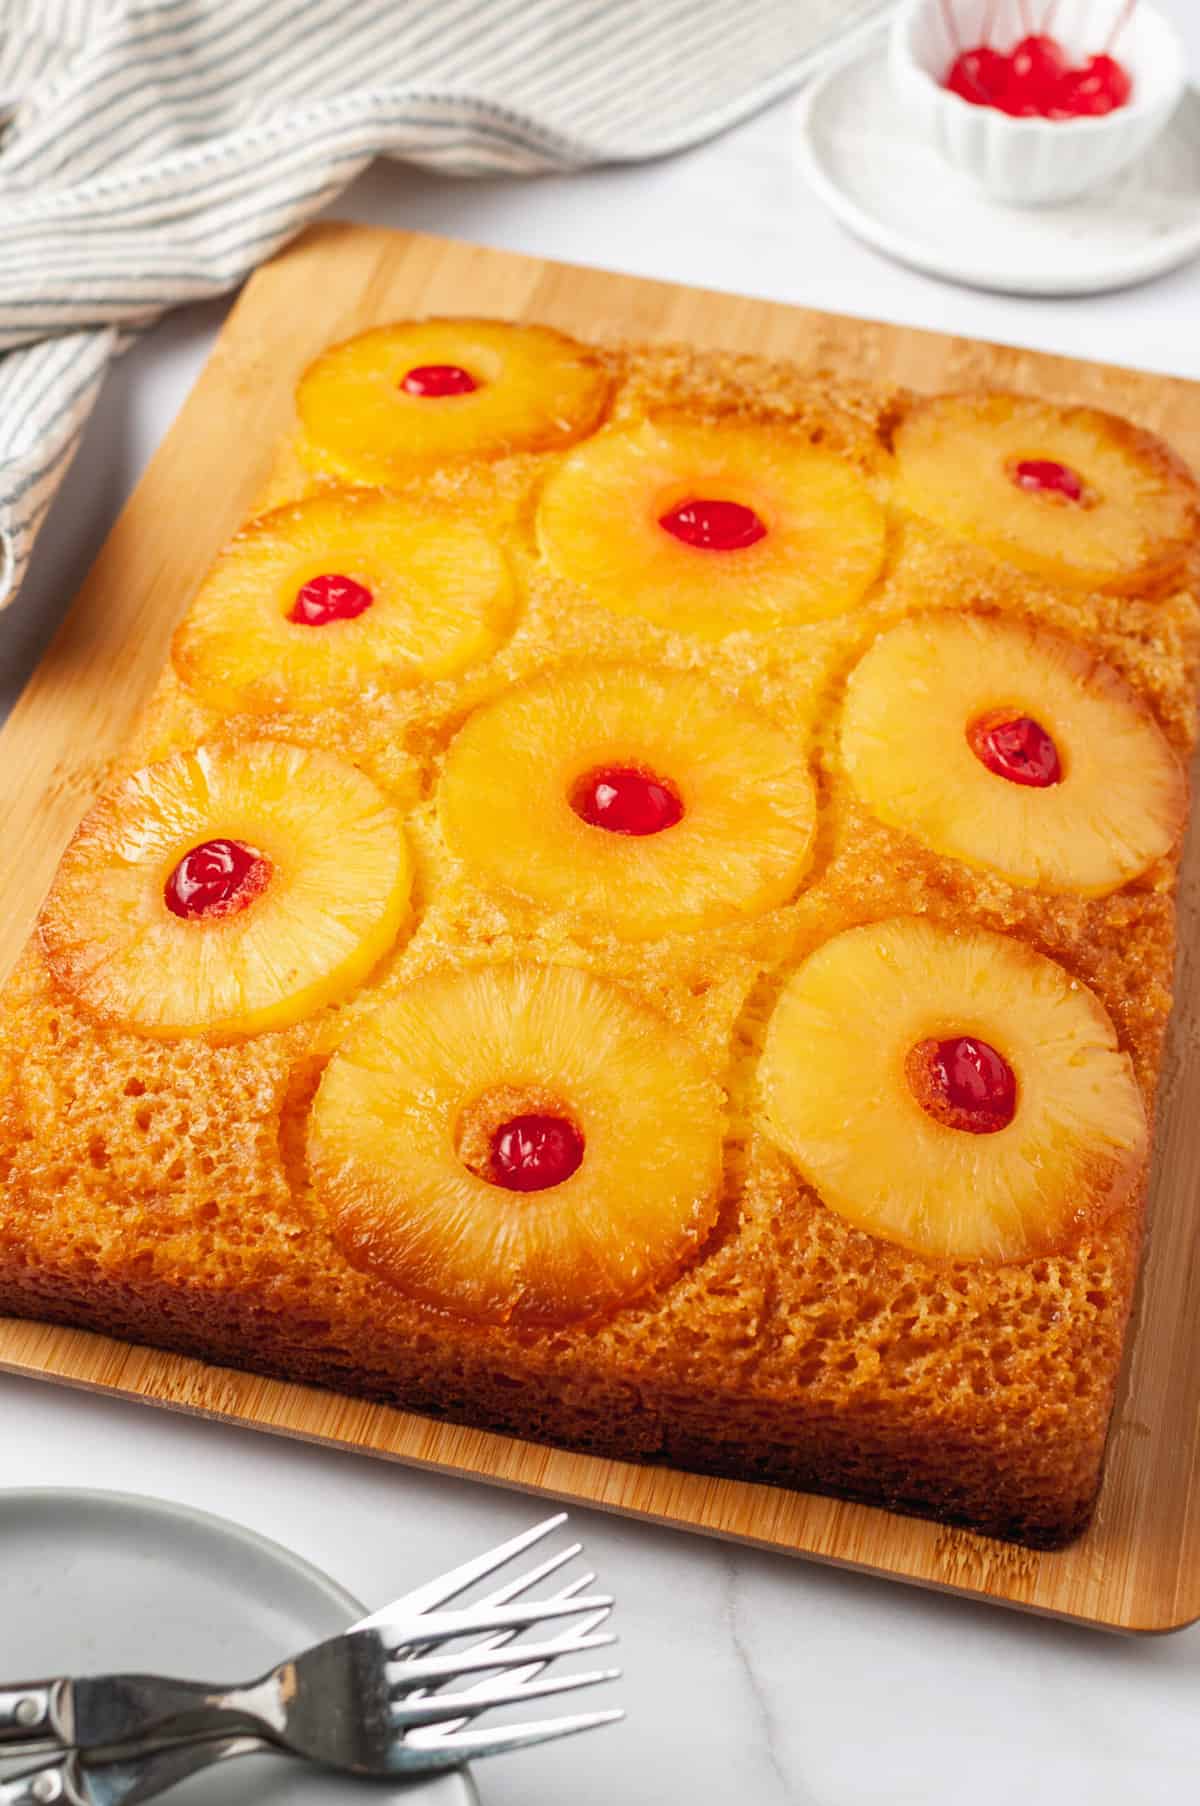 baked pineapple upside down cake sitting on a wooden cutting board